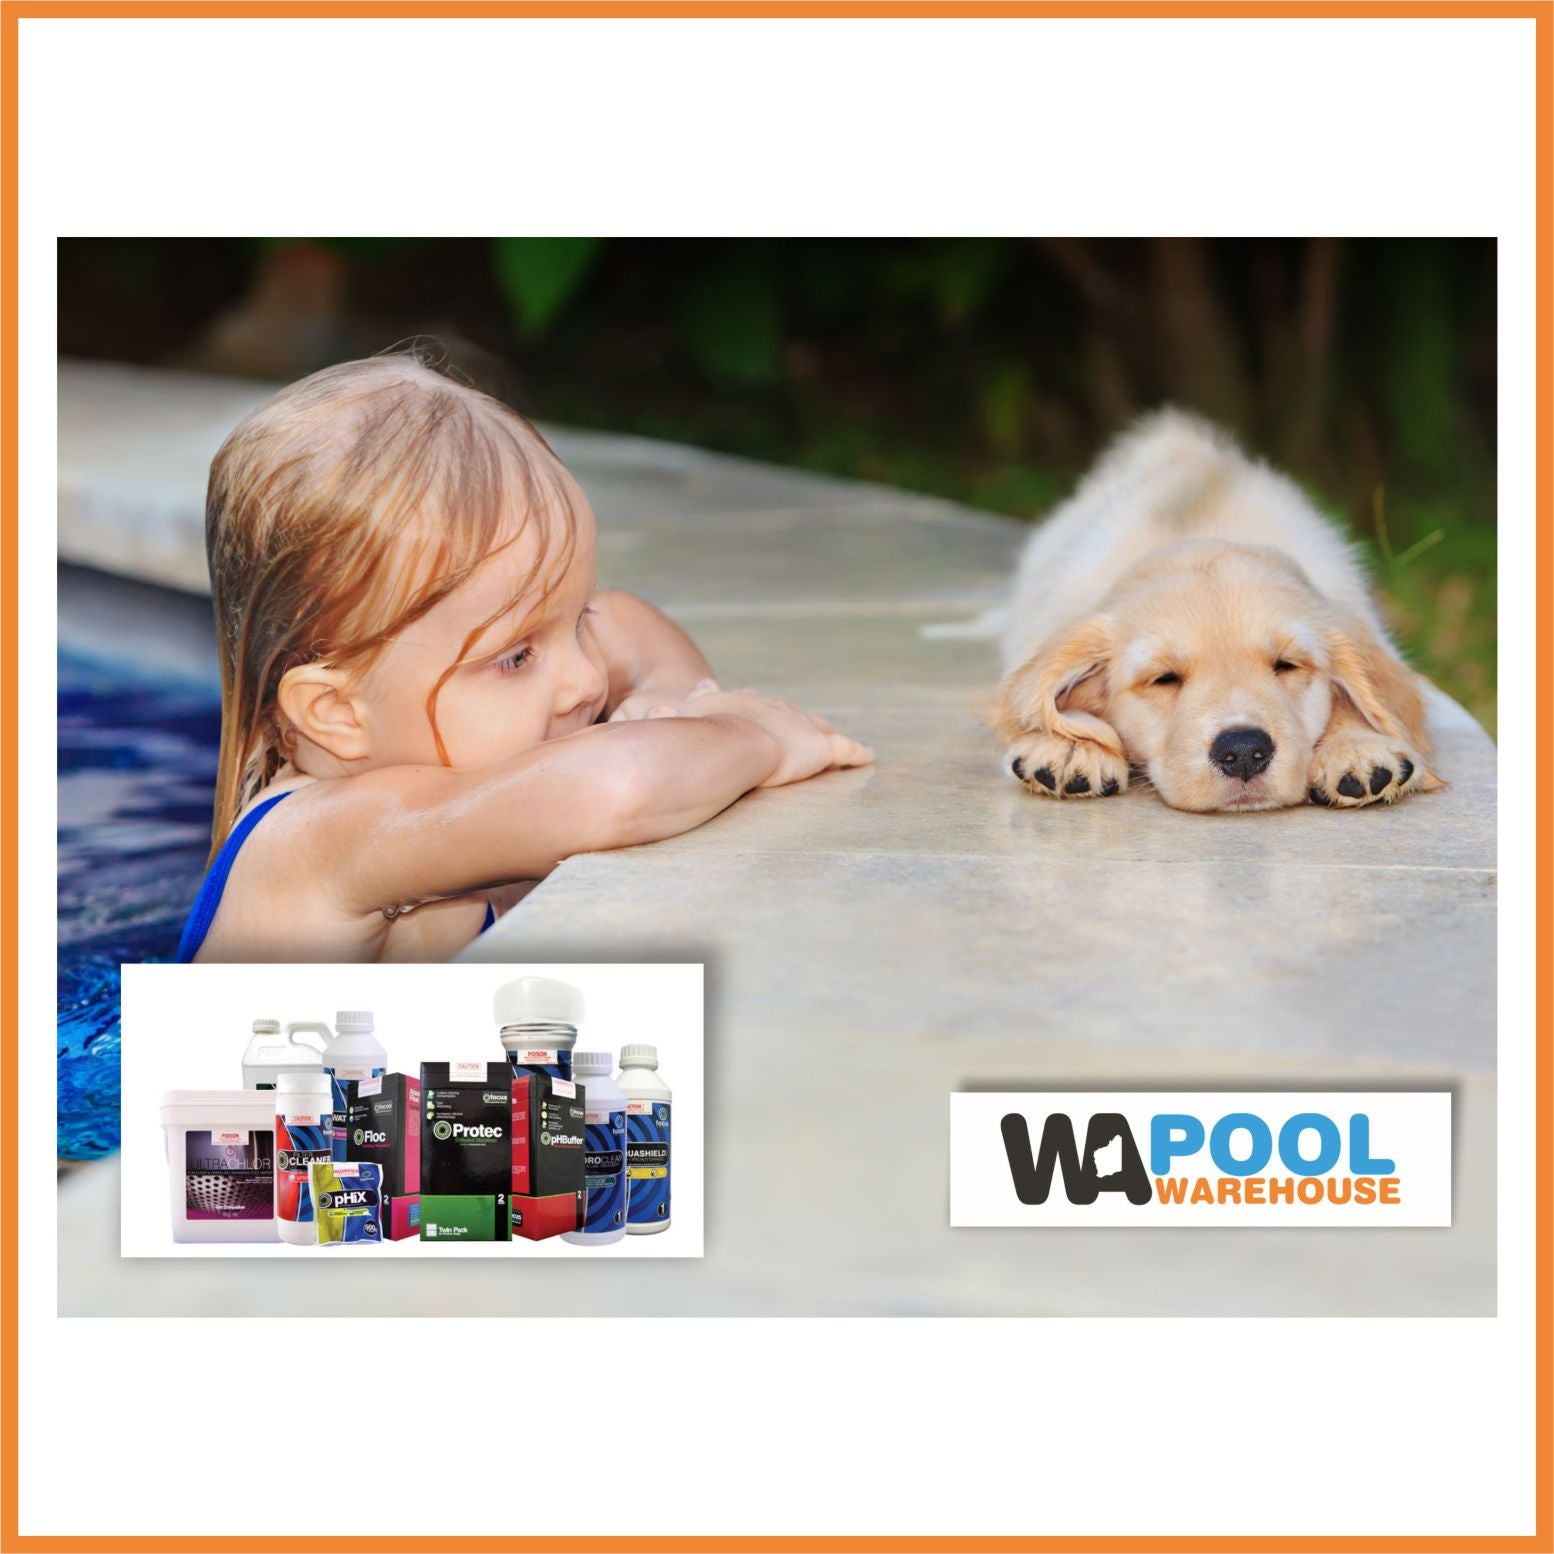 How to add chemicals to your pool safely.